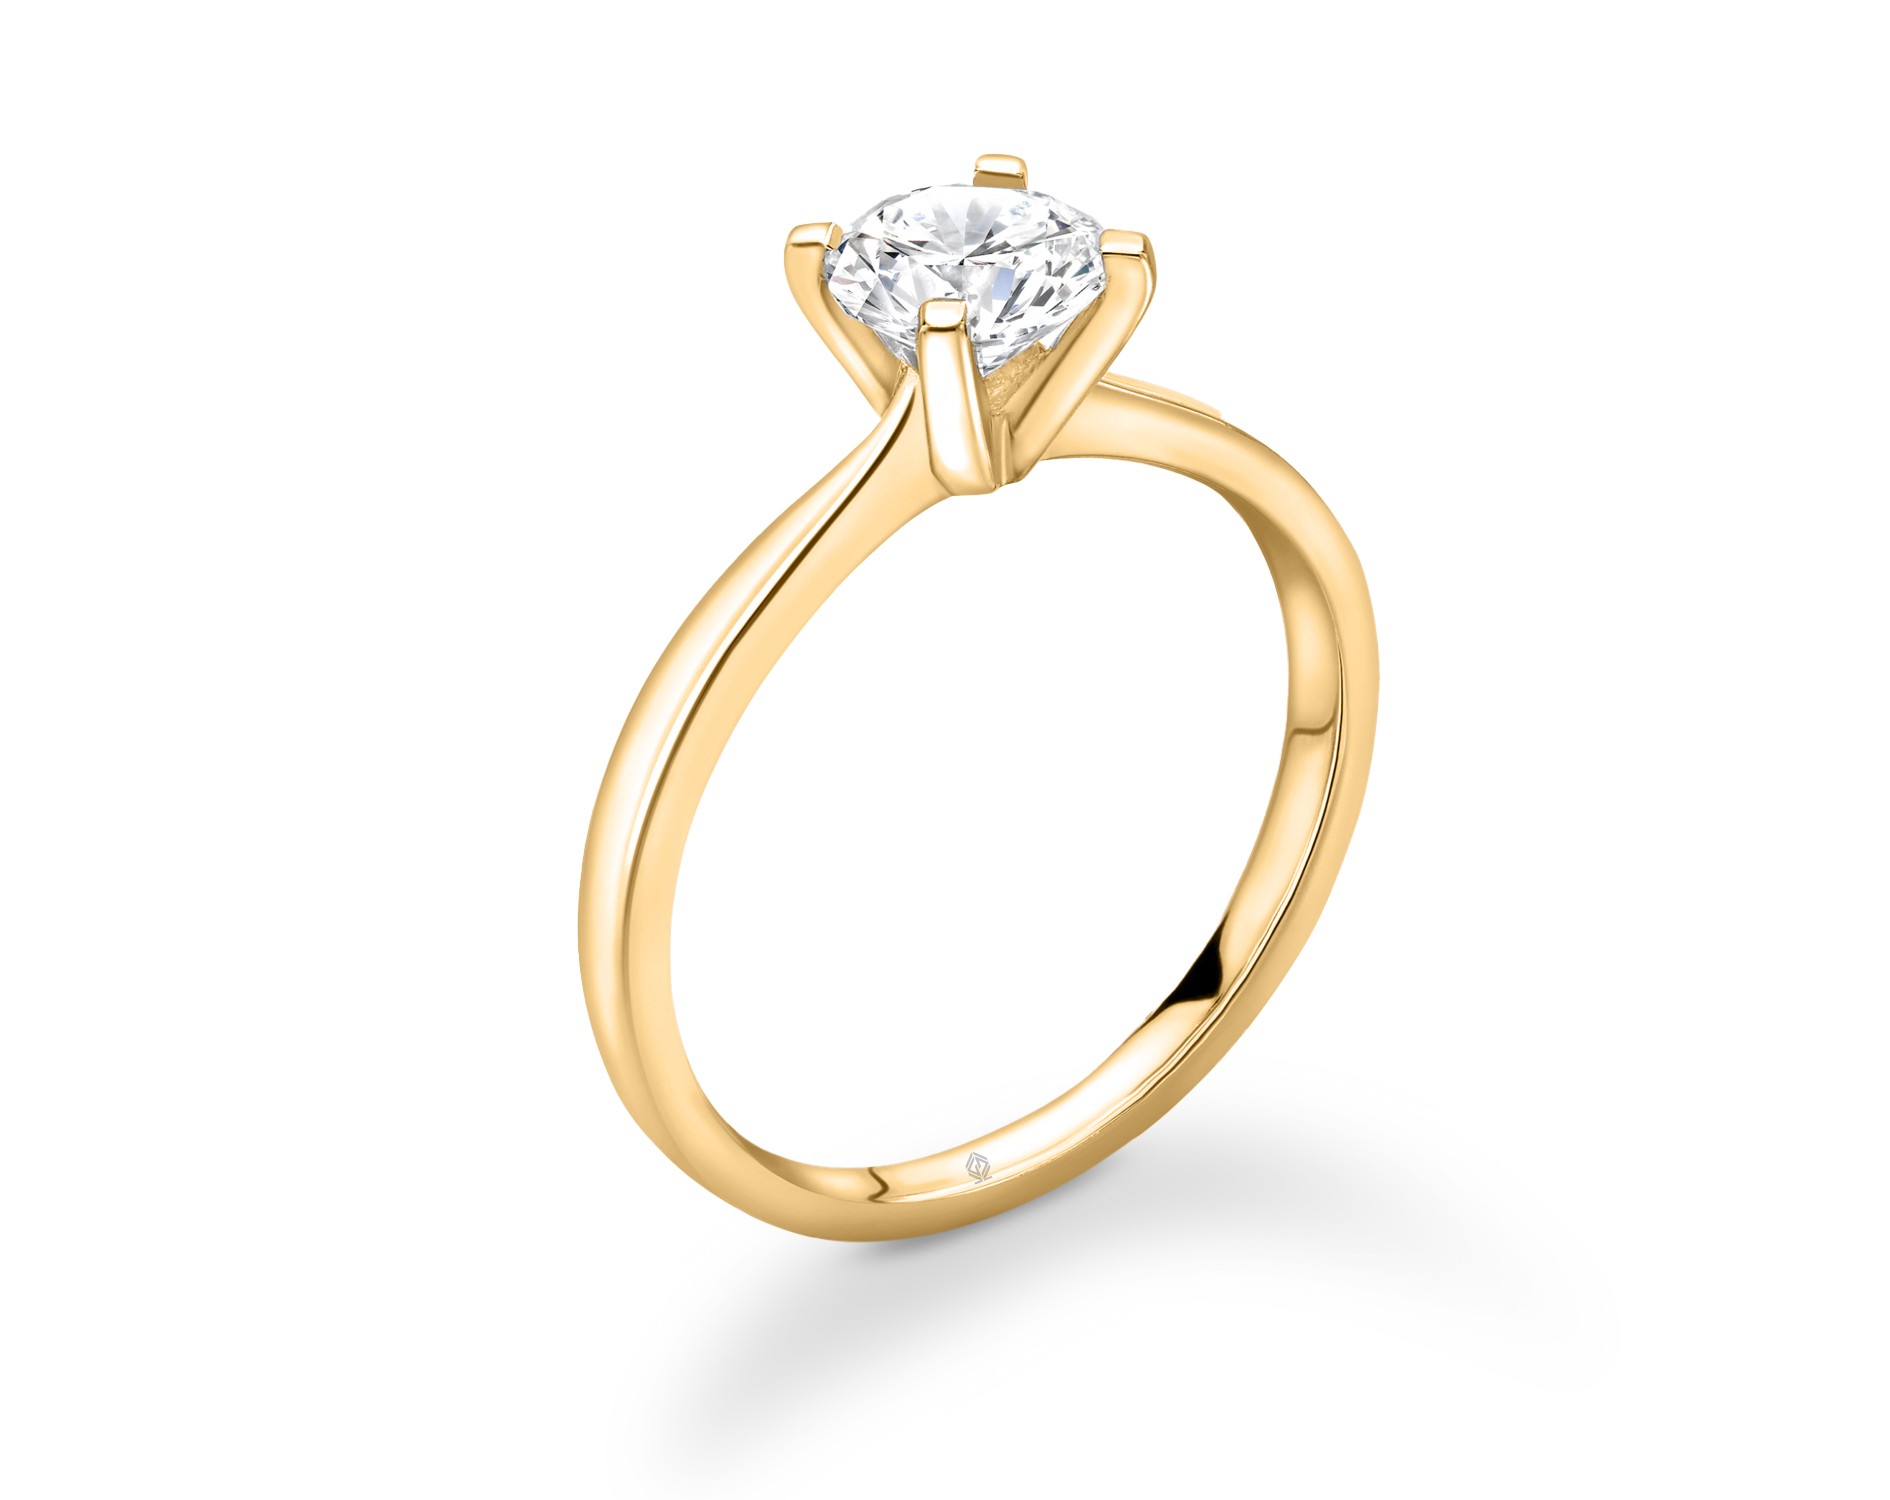 18K YELLOW GOLD 4 PRONGS SOLITAIRE ROUND CUT DIAMOND ENGAGEMENT RING